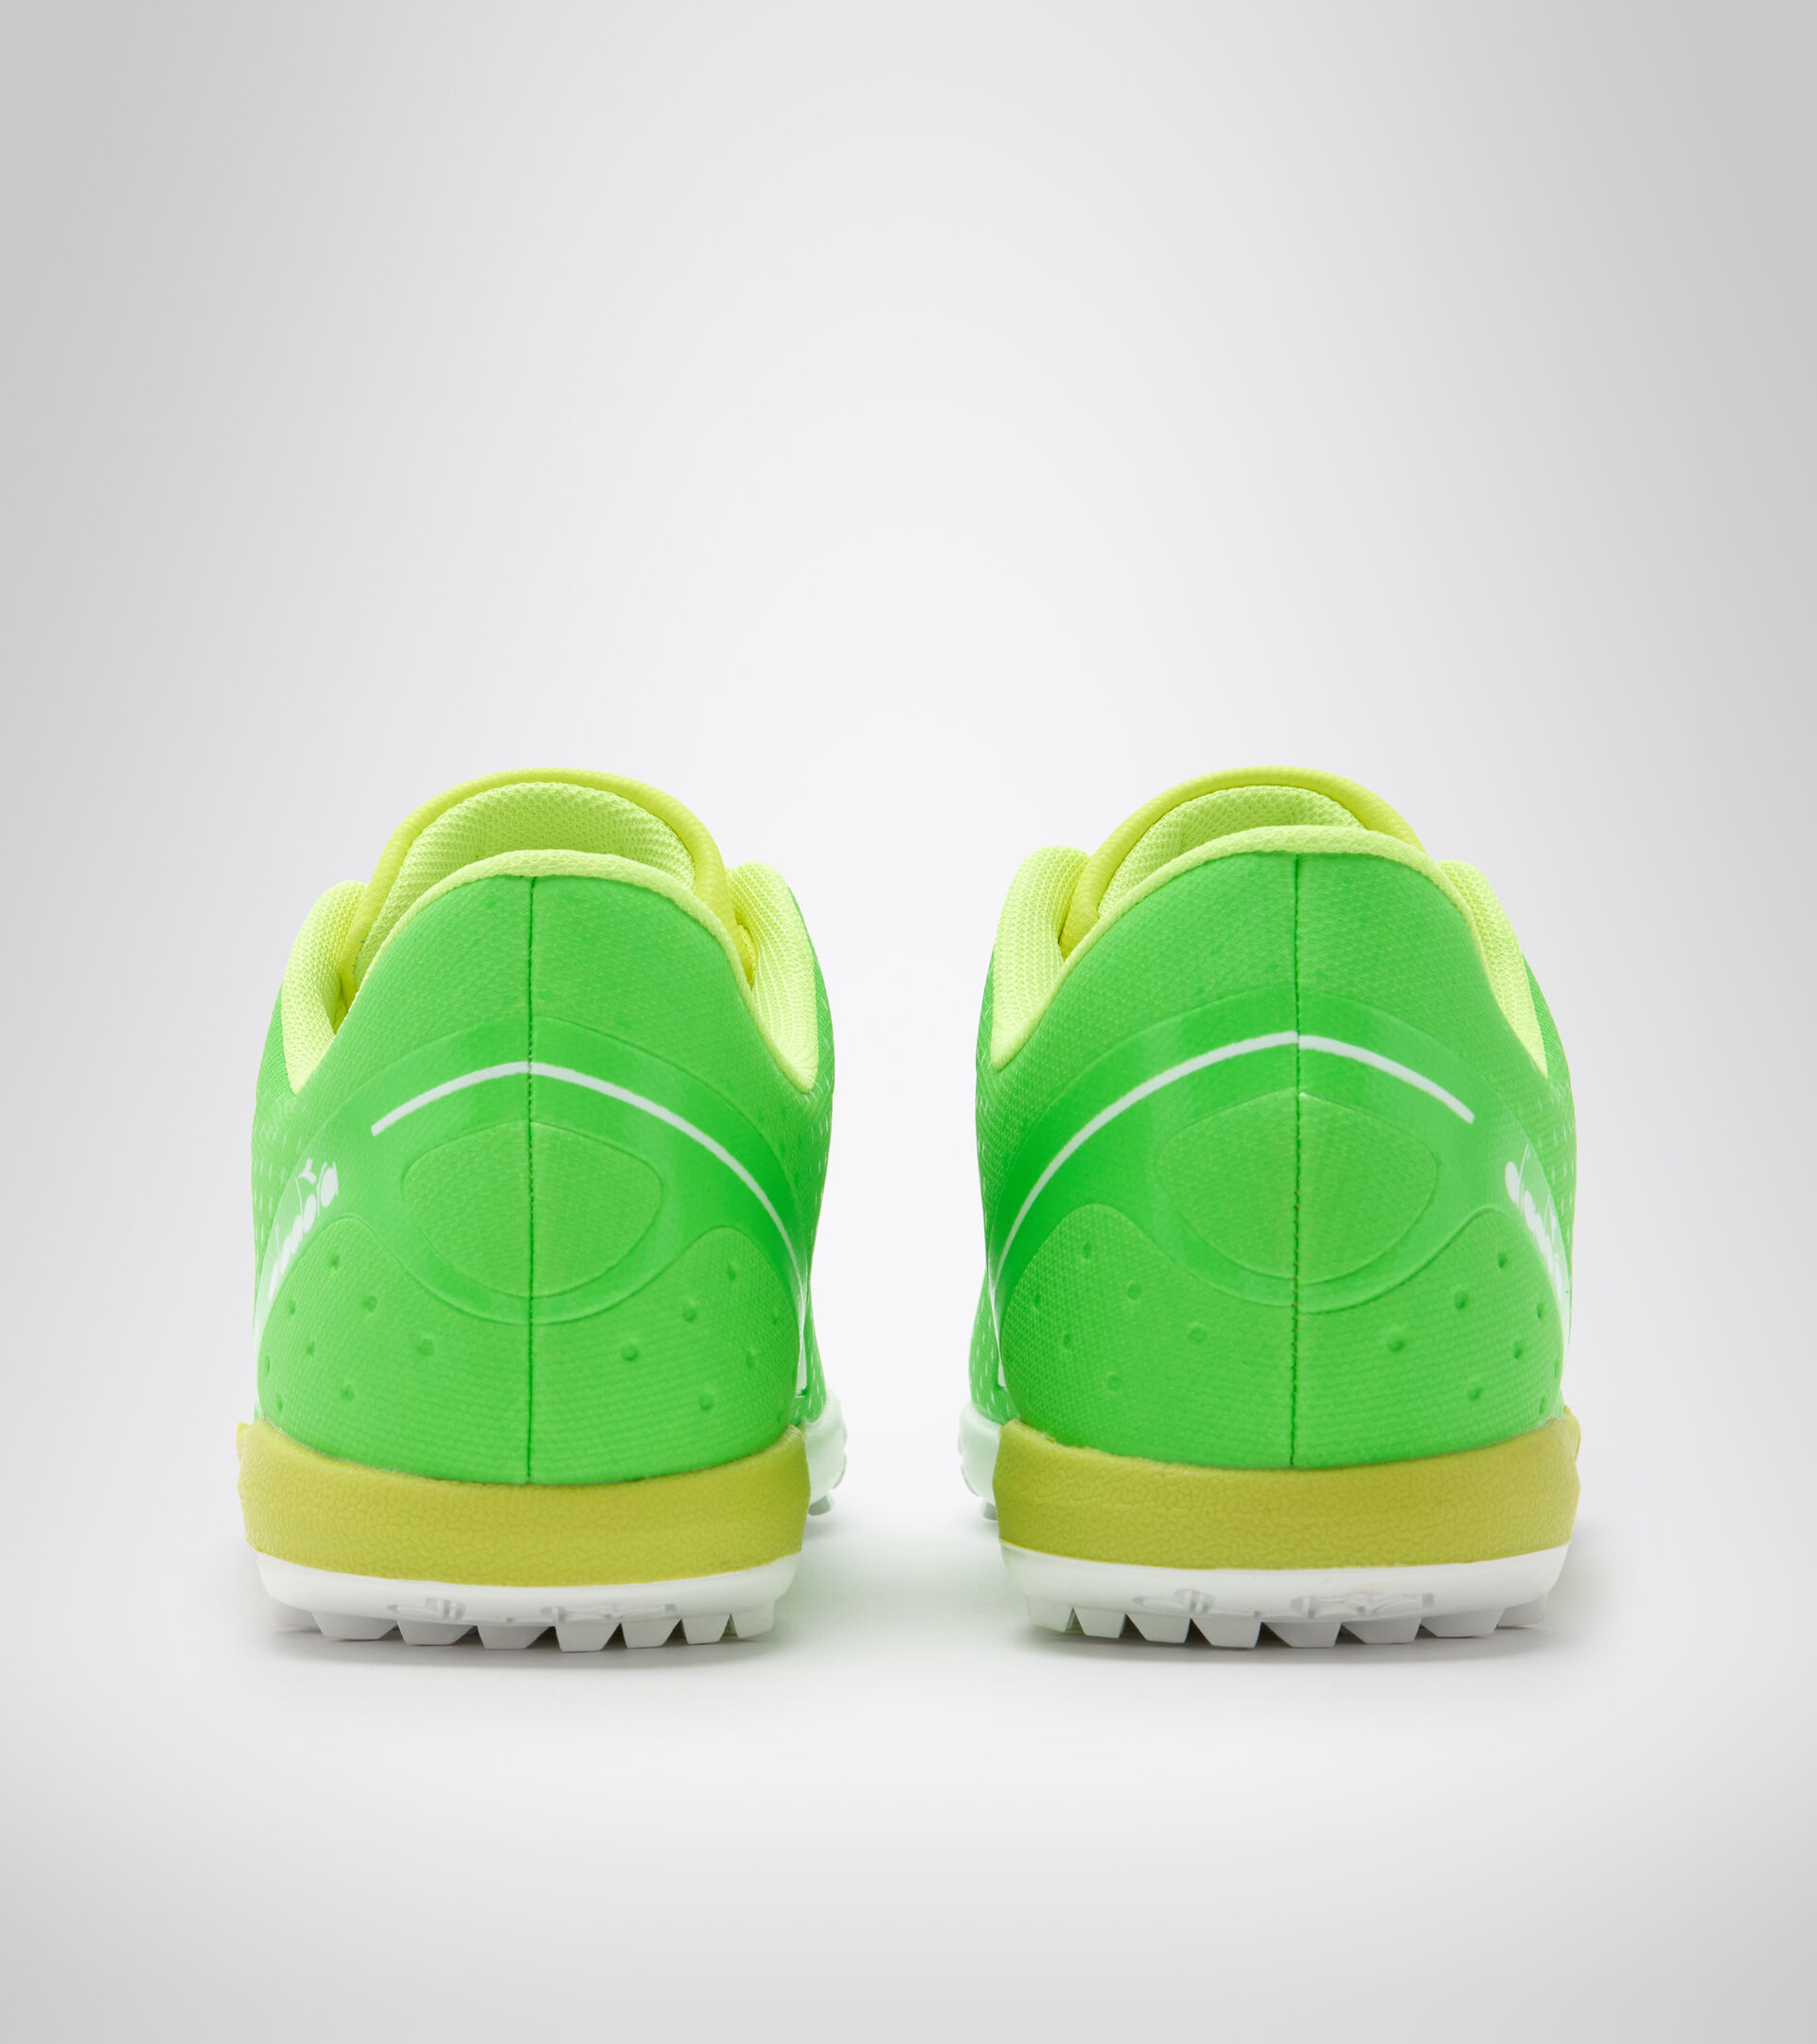 Futsal boot - Specific outsole for synthetic/hard grounds PICHICHI 5 TFR GREEN FLUO/WHT/FLUO YELLOW DD - Diadora